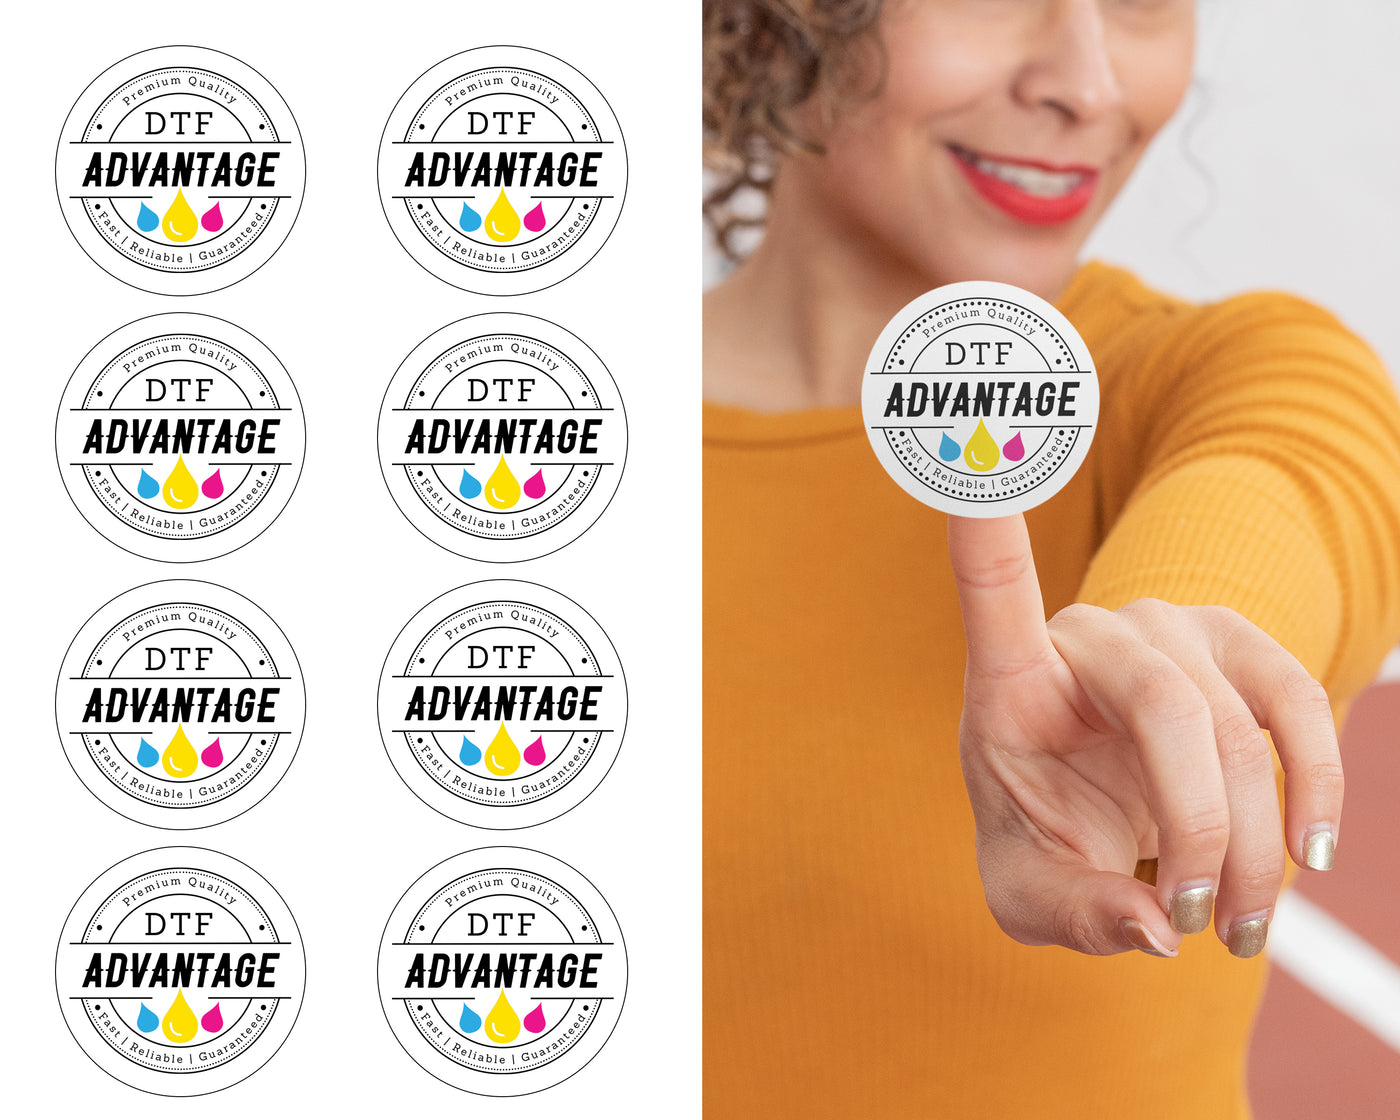  Vinyl stickers on a vinyl sticker sheet with a woman holding a sticker on her finger